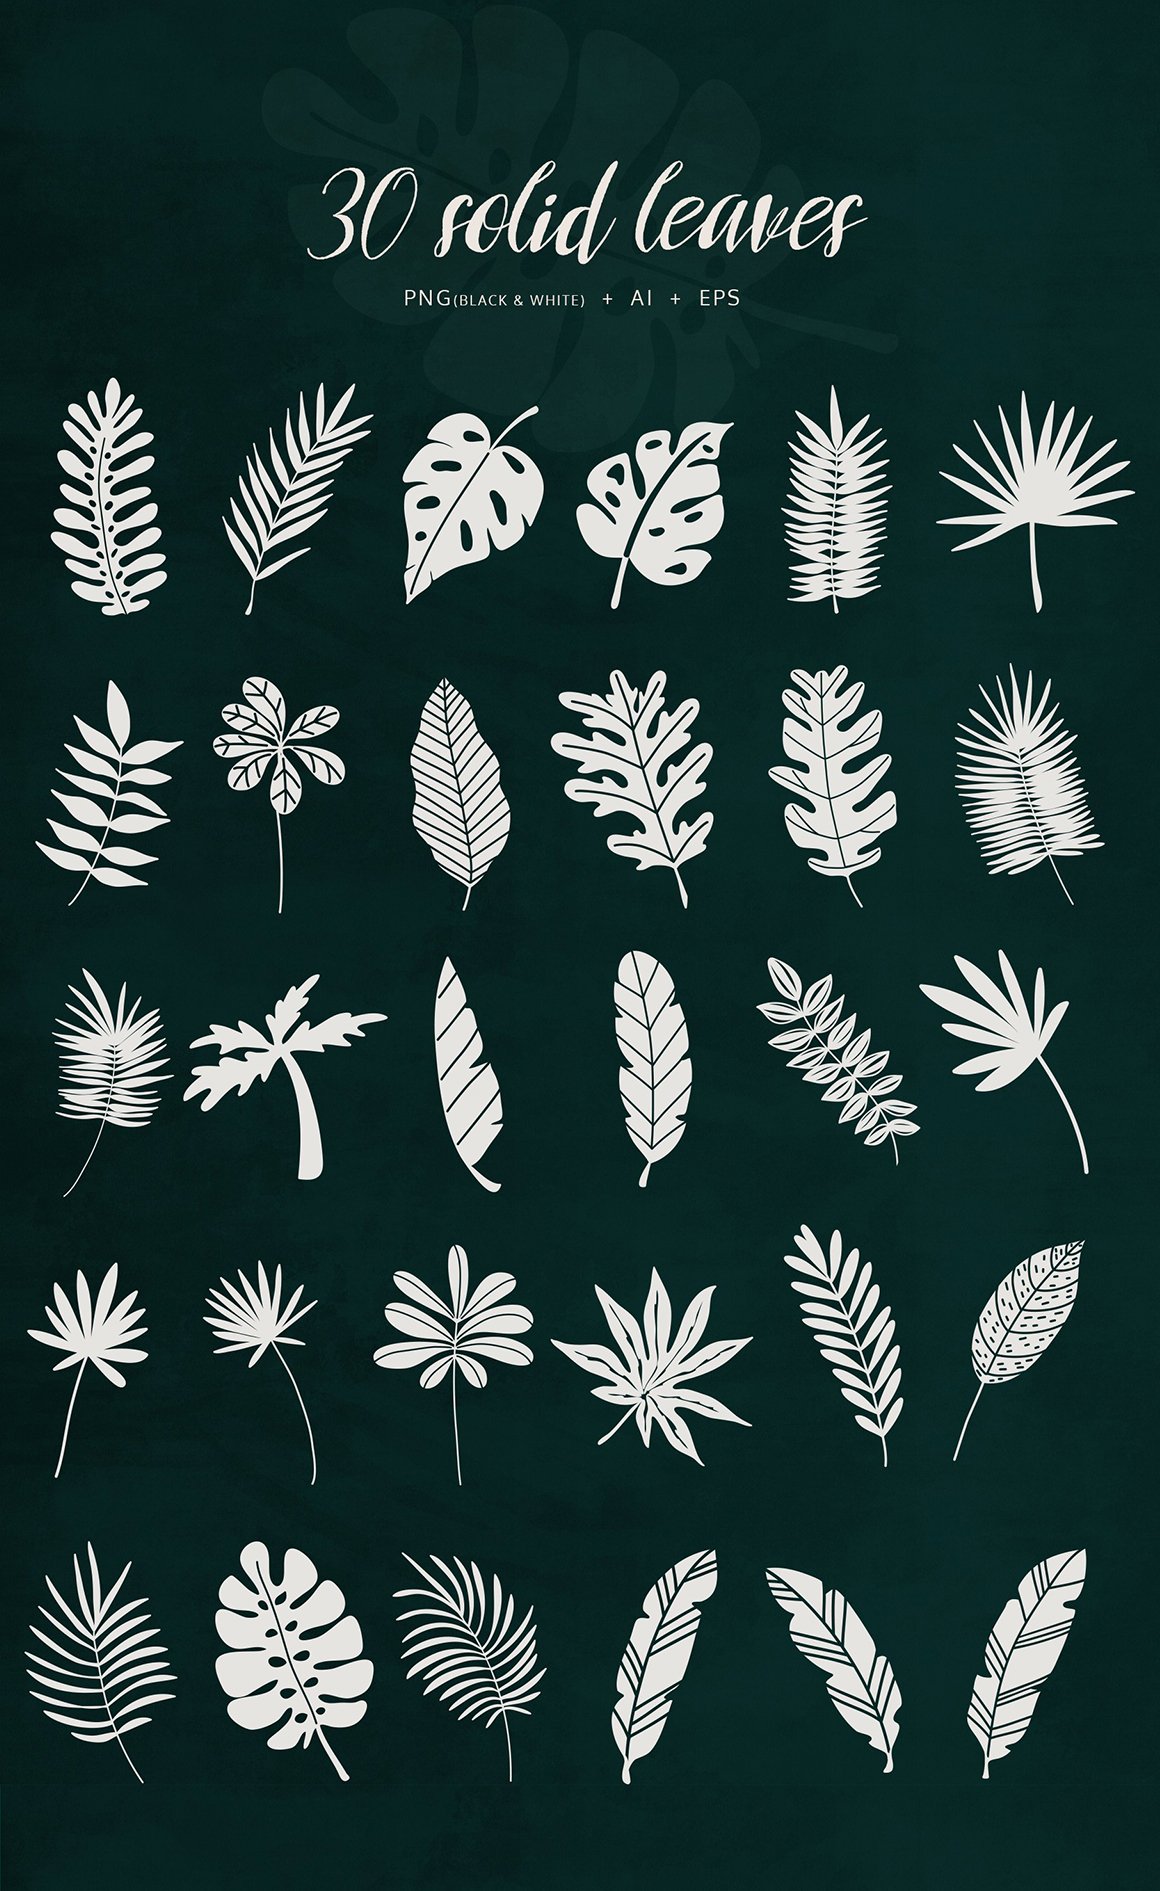 Tropical Leaves & Patterns